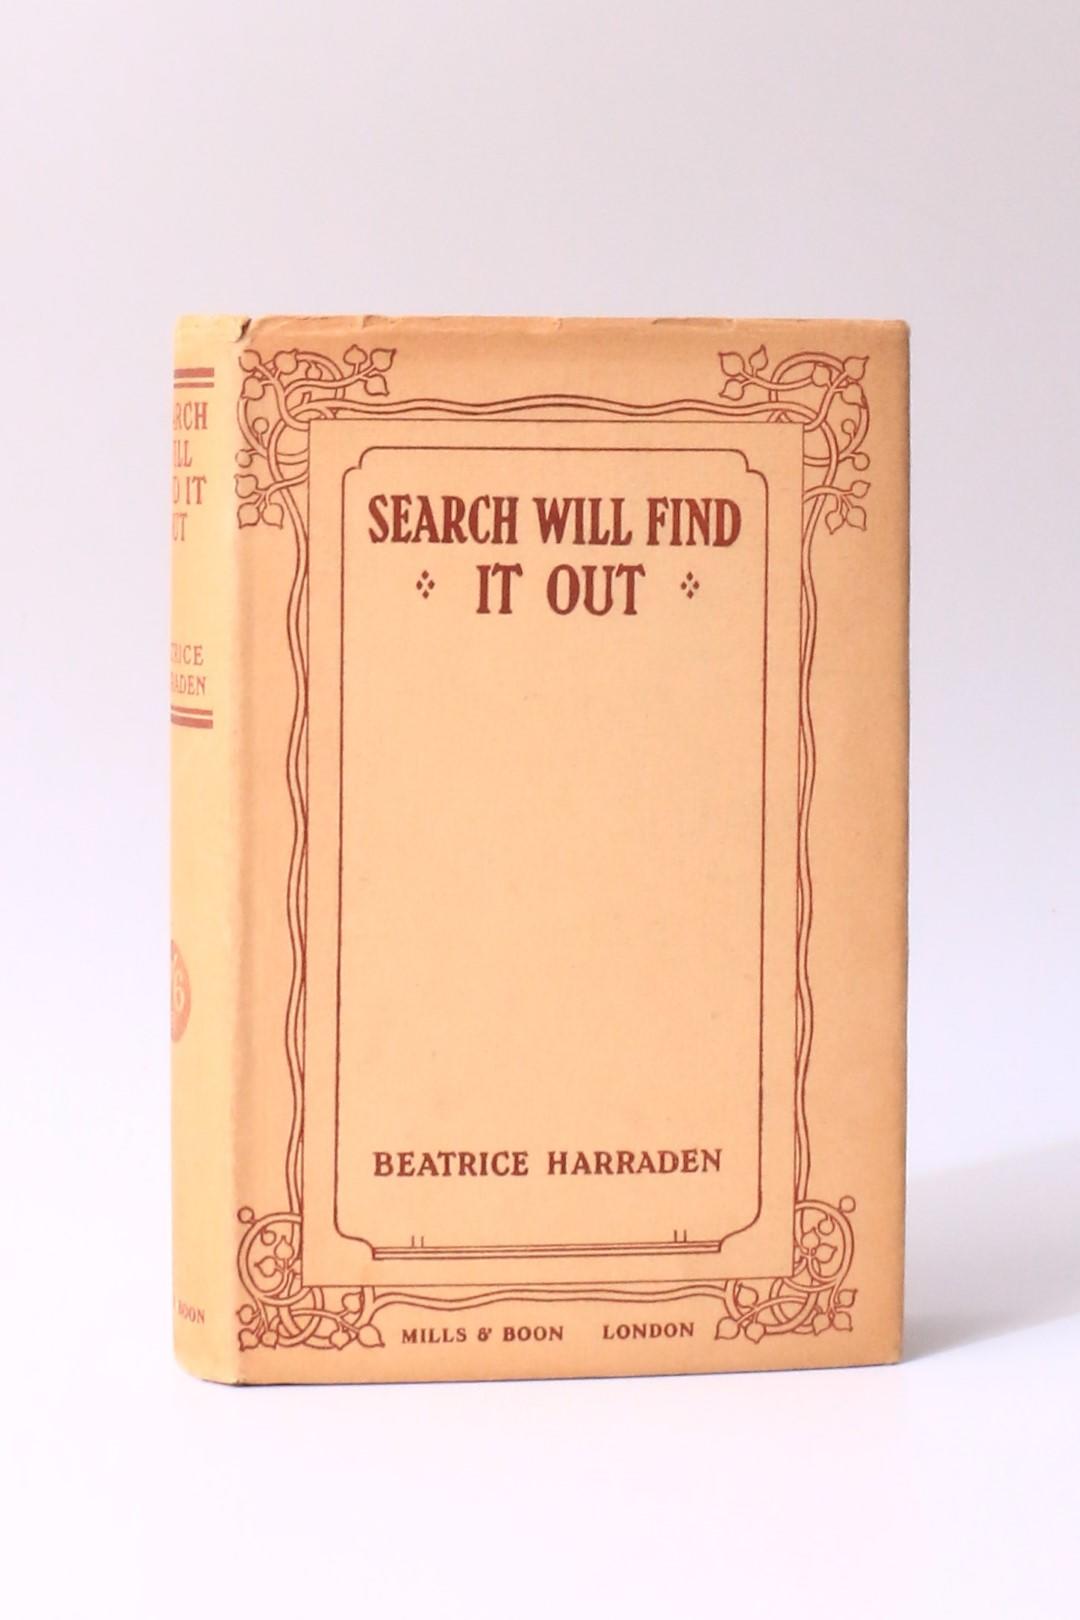 Beatrice Harraden - Search Will Find it Out - Mills & Boon, 1928, First Edition.